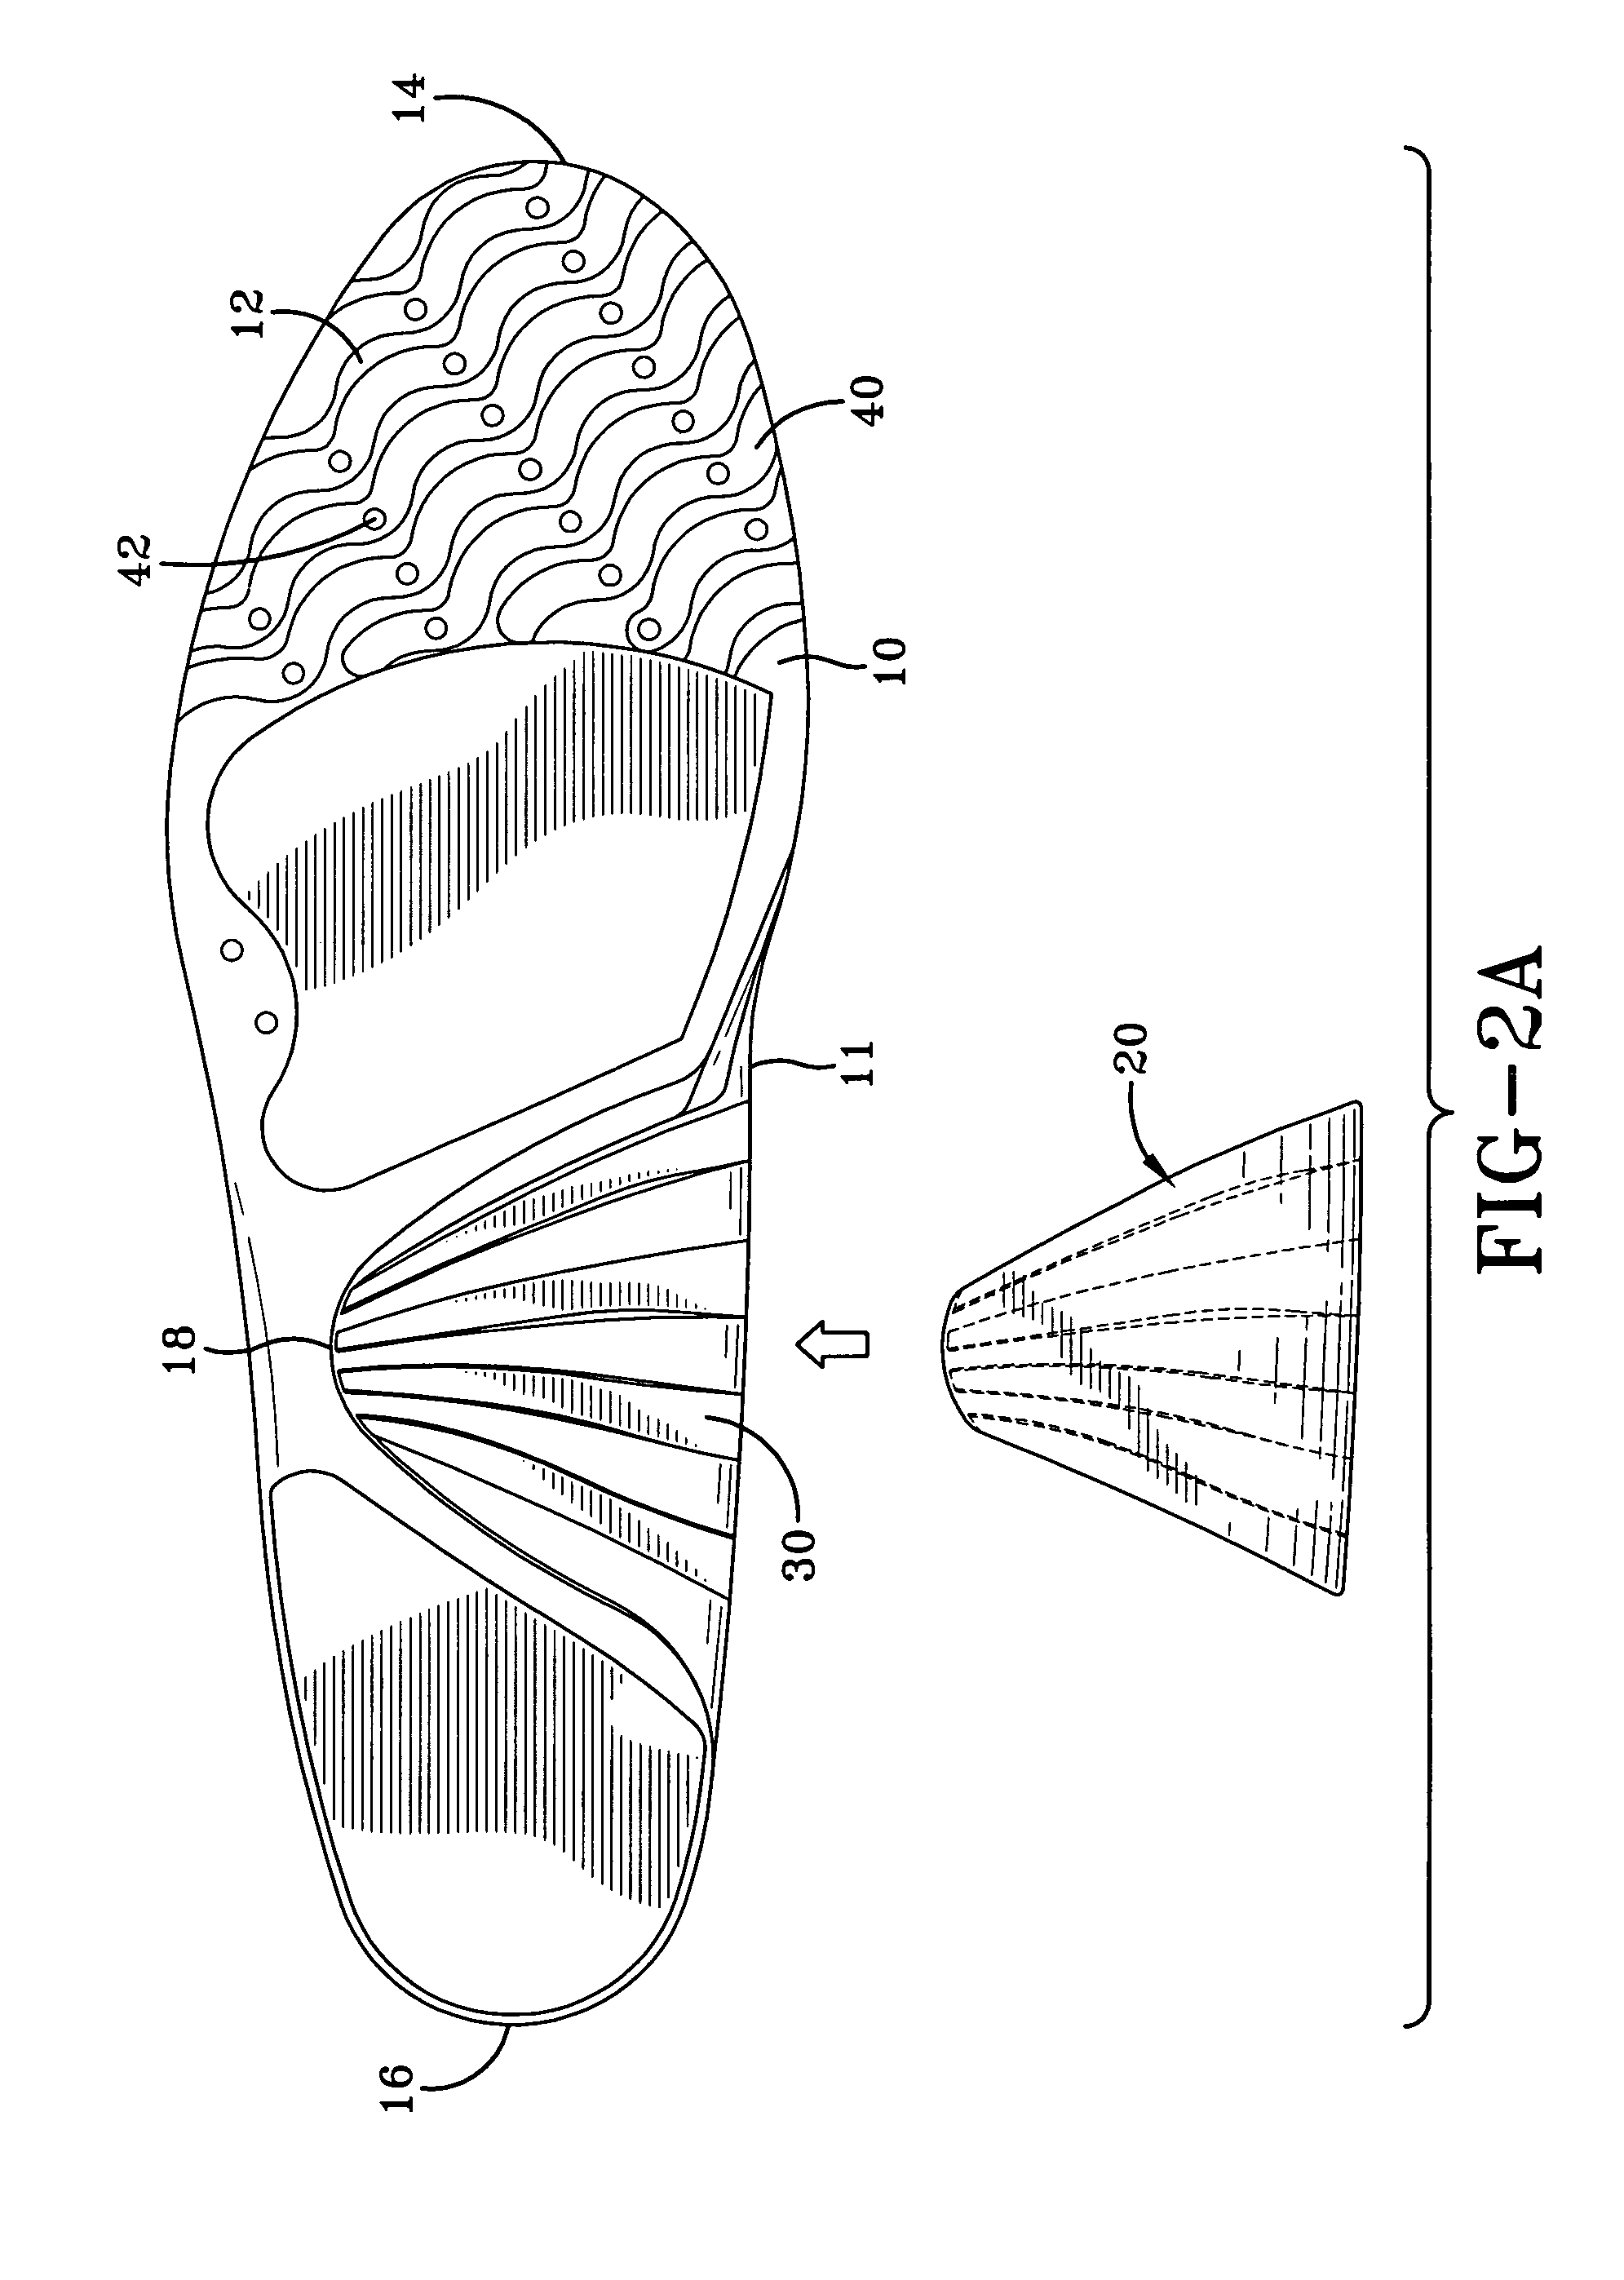 Adjustable and interchangebale insole and arch support system